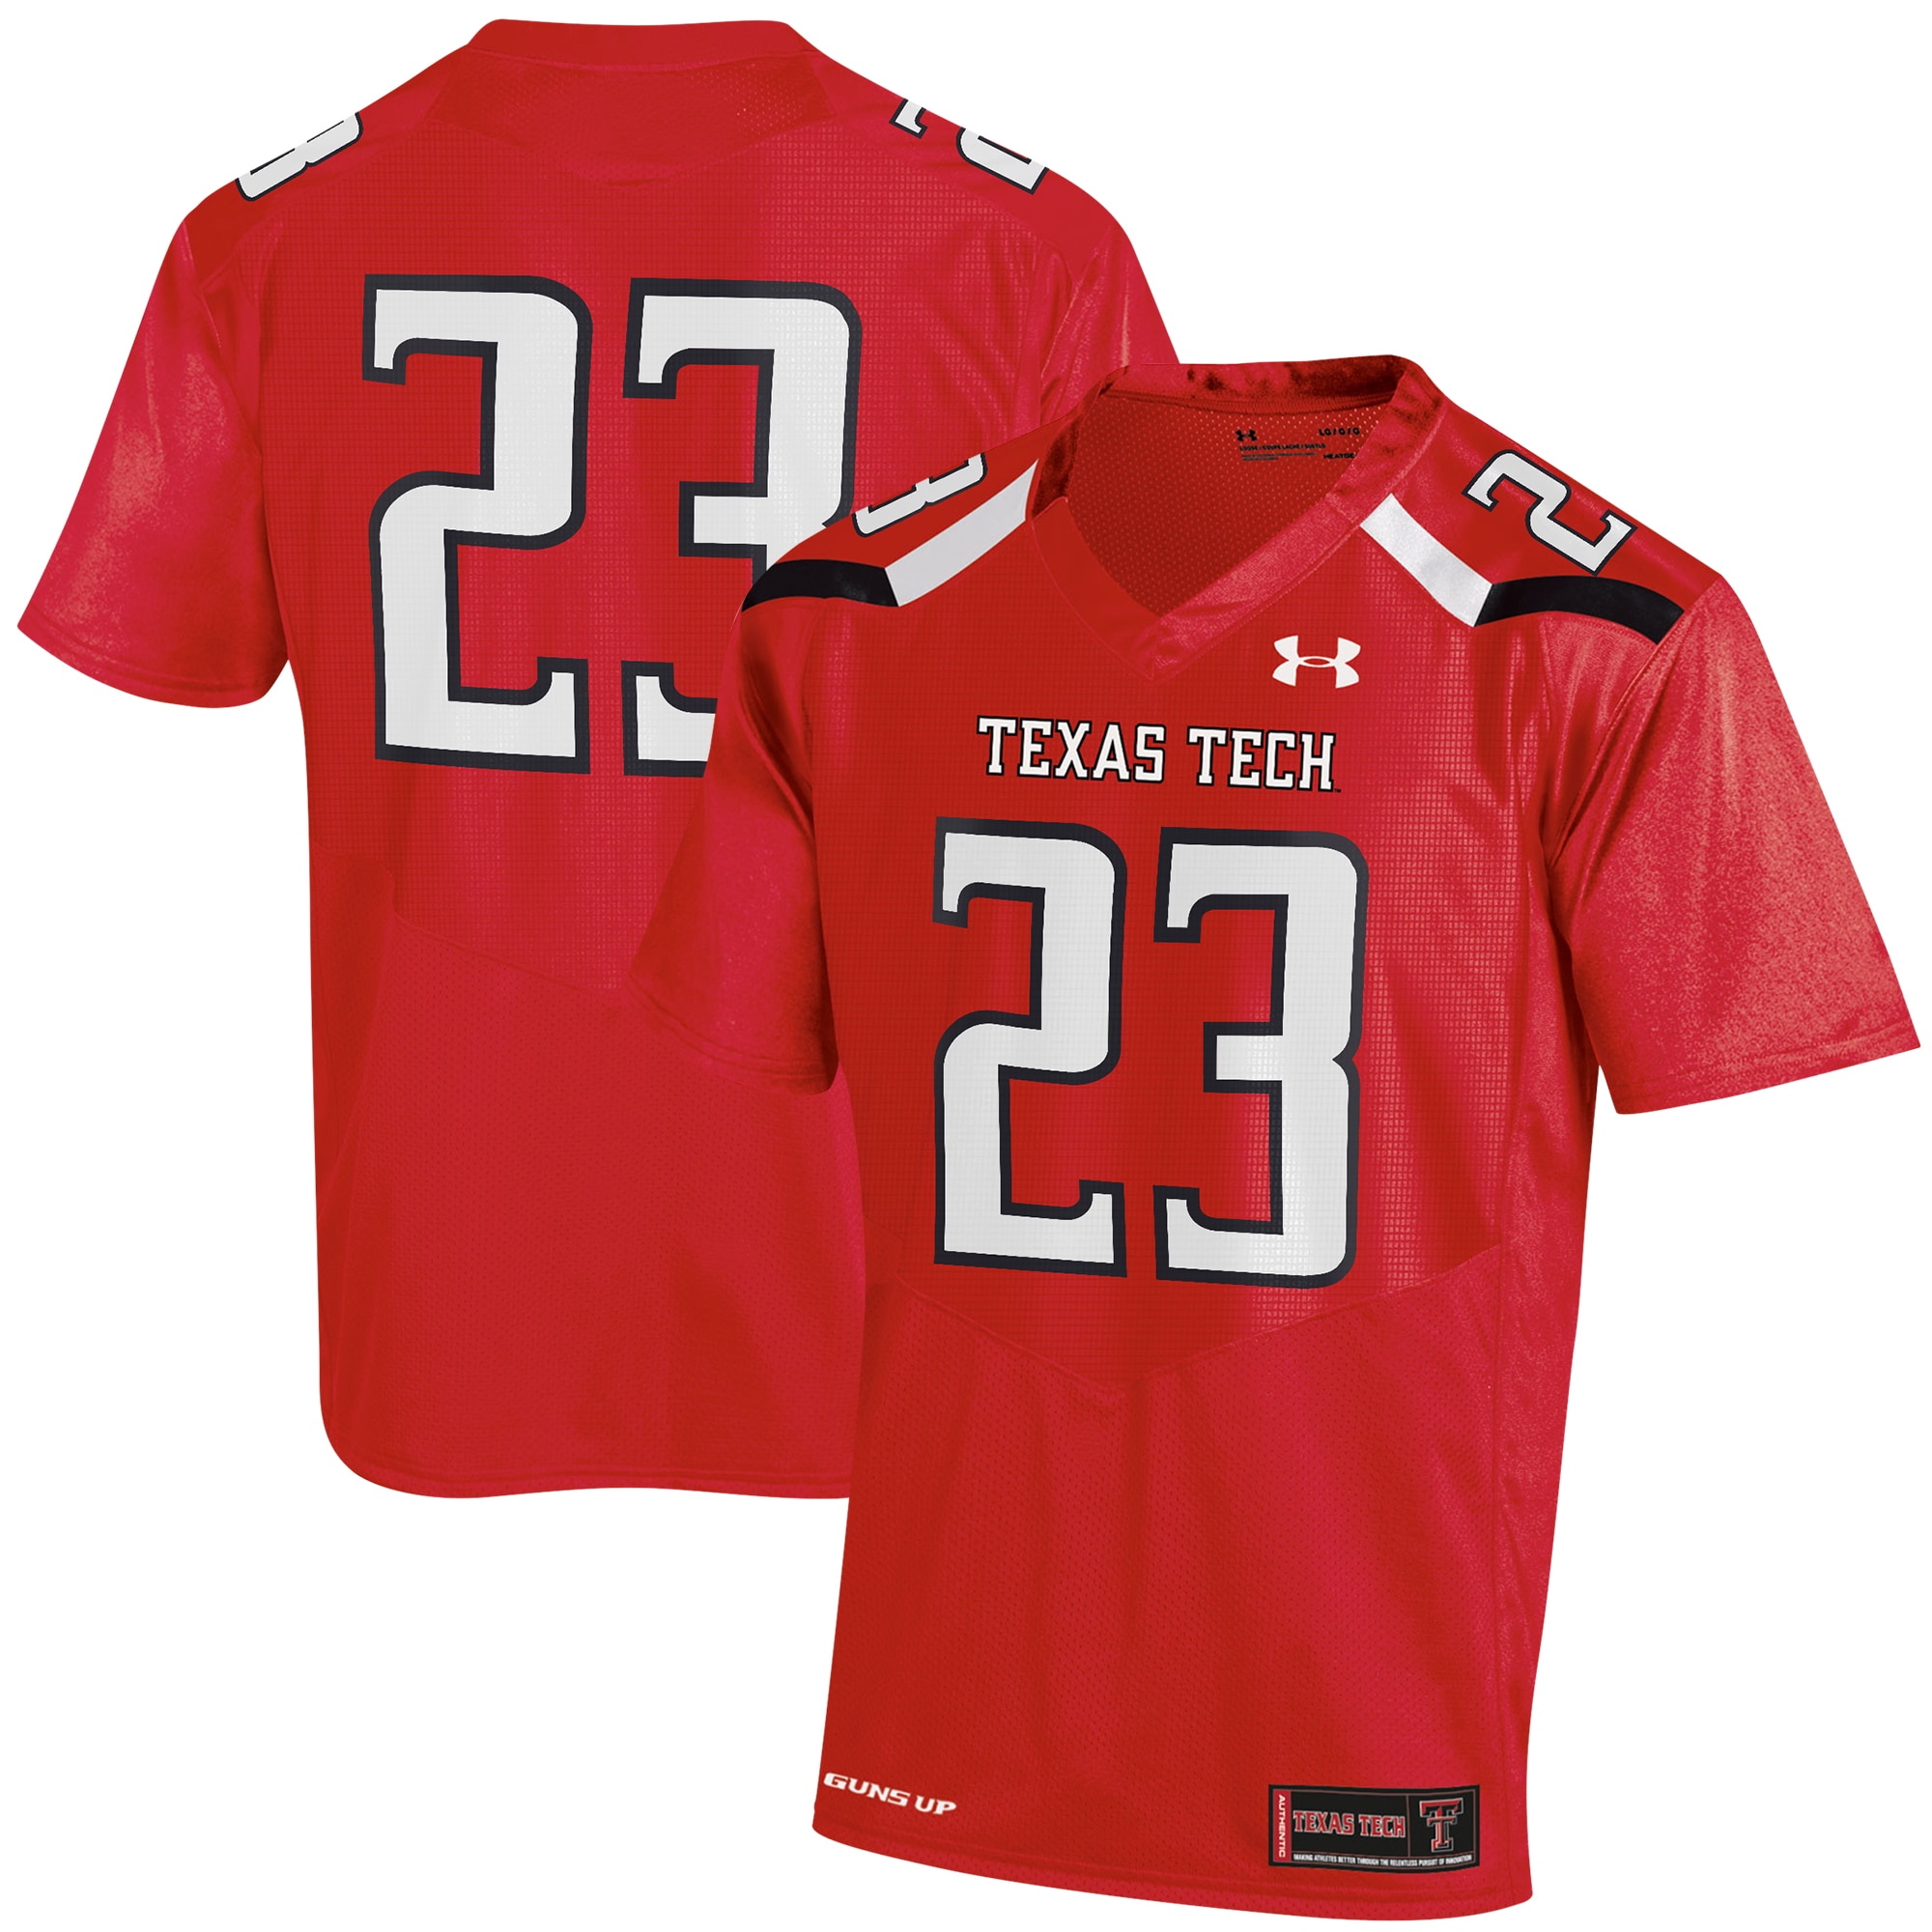 #23 Texas Tech Red Raiders Under Armour Replica Jersey - Red For Youth Women Men